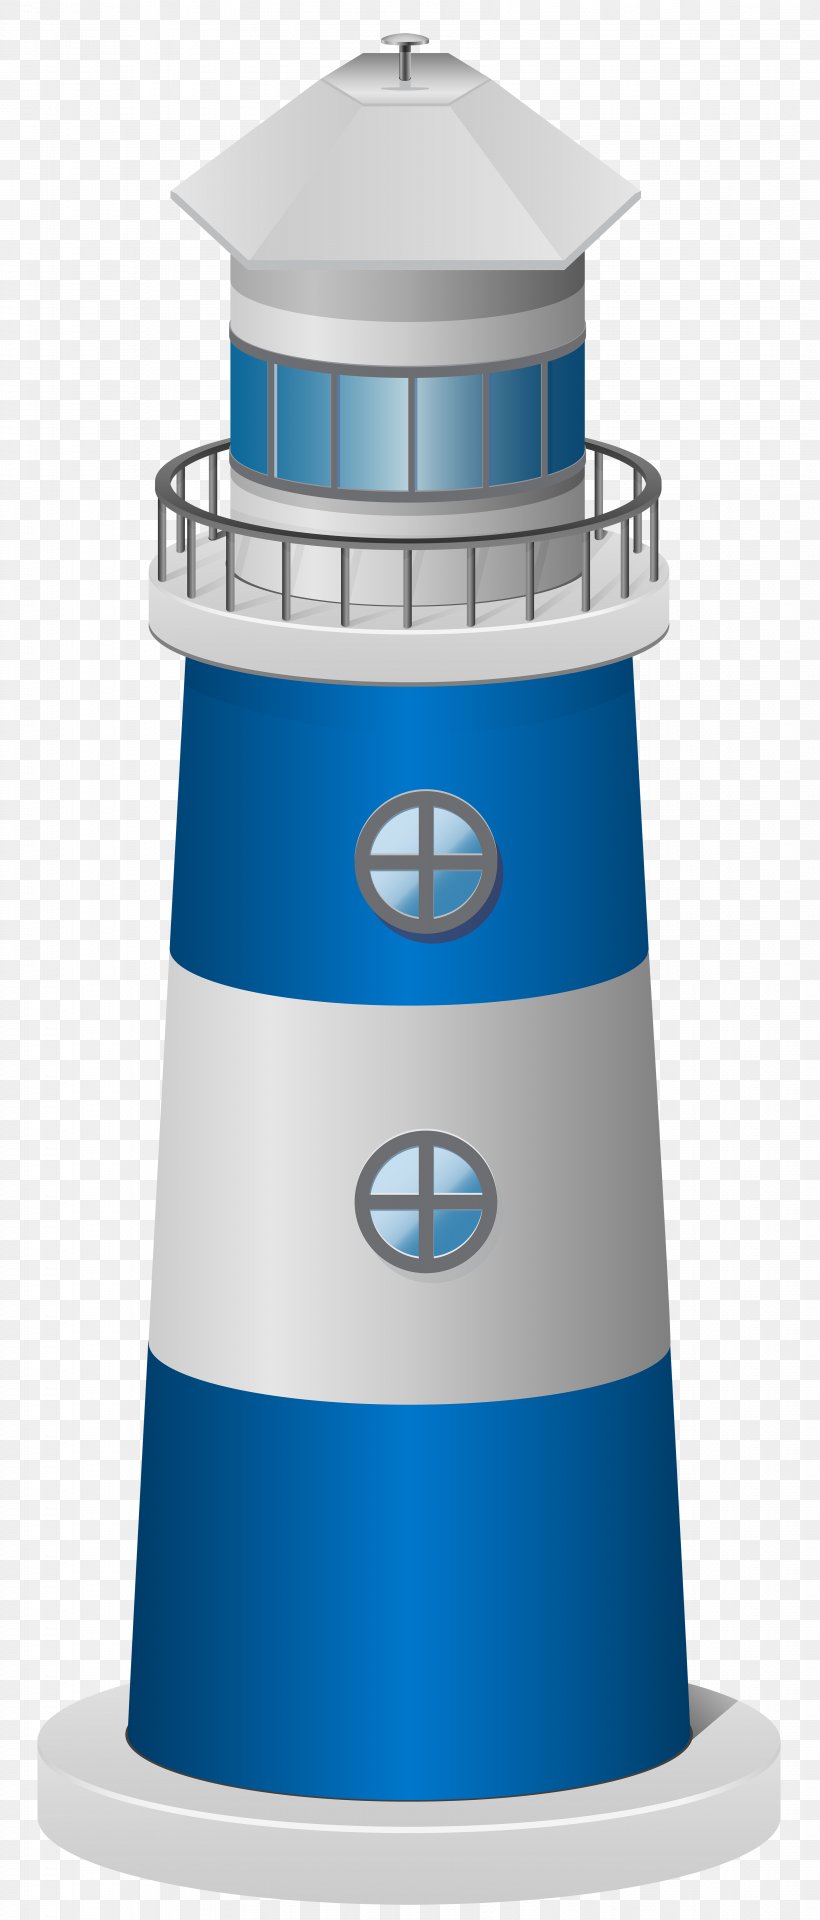 Clip Art Image Illustration Vector Graphics, PNG, 3415x8000px, Lighthouse, Blue, Cylinder, Tower Download Free